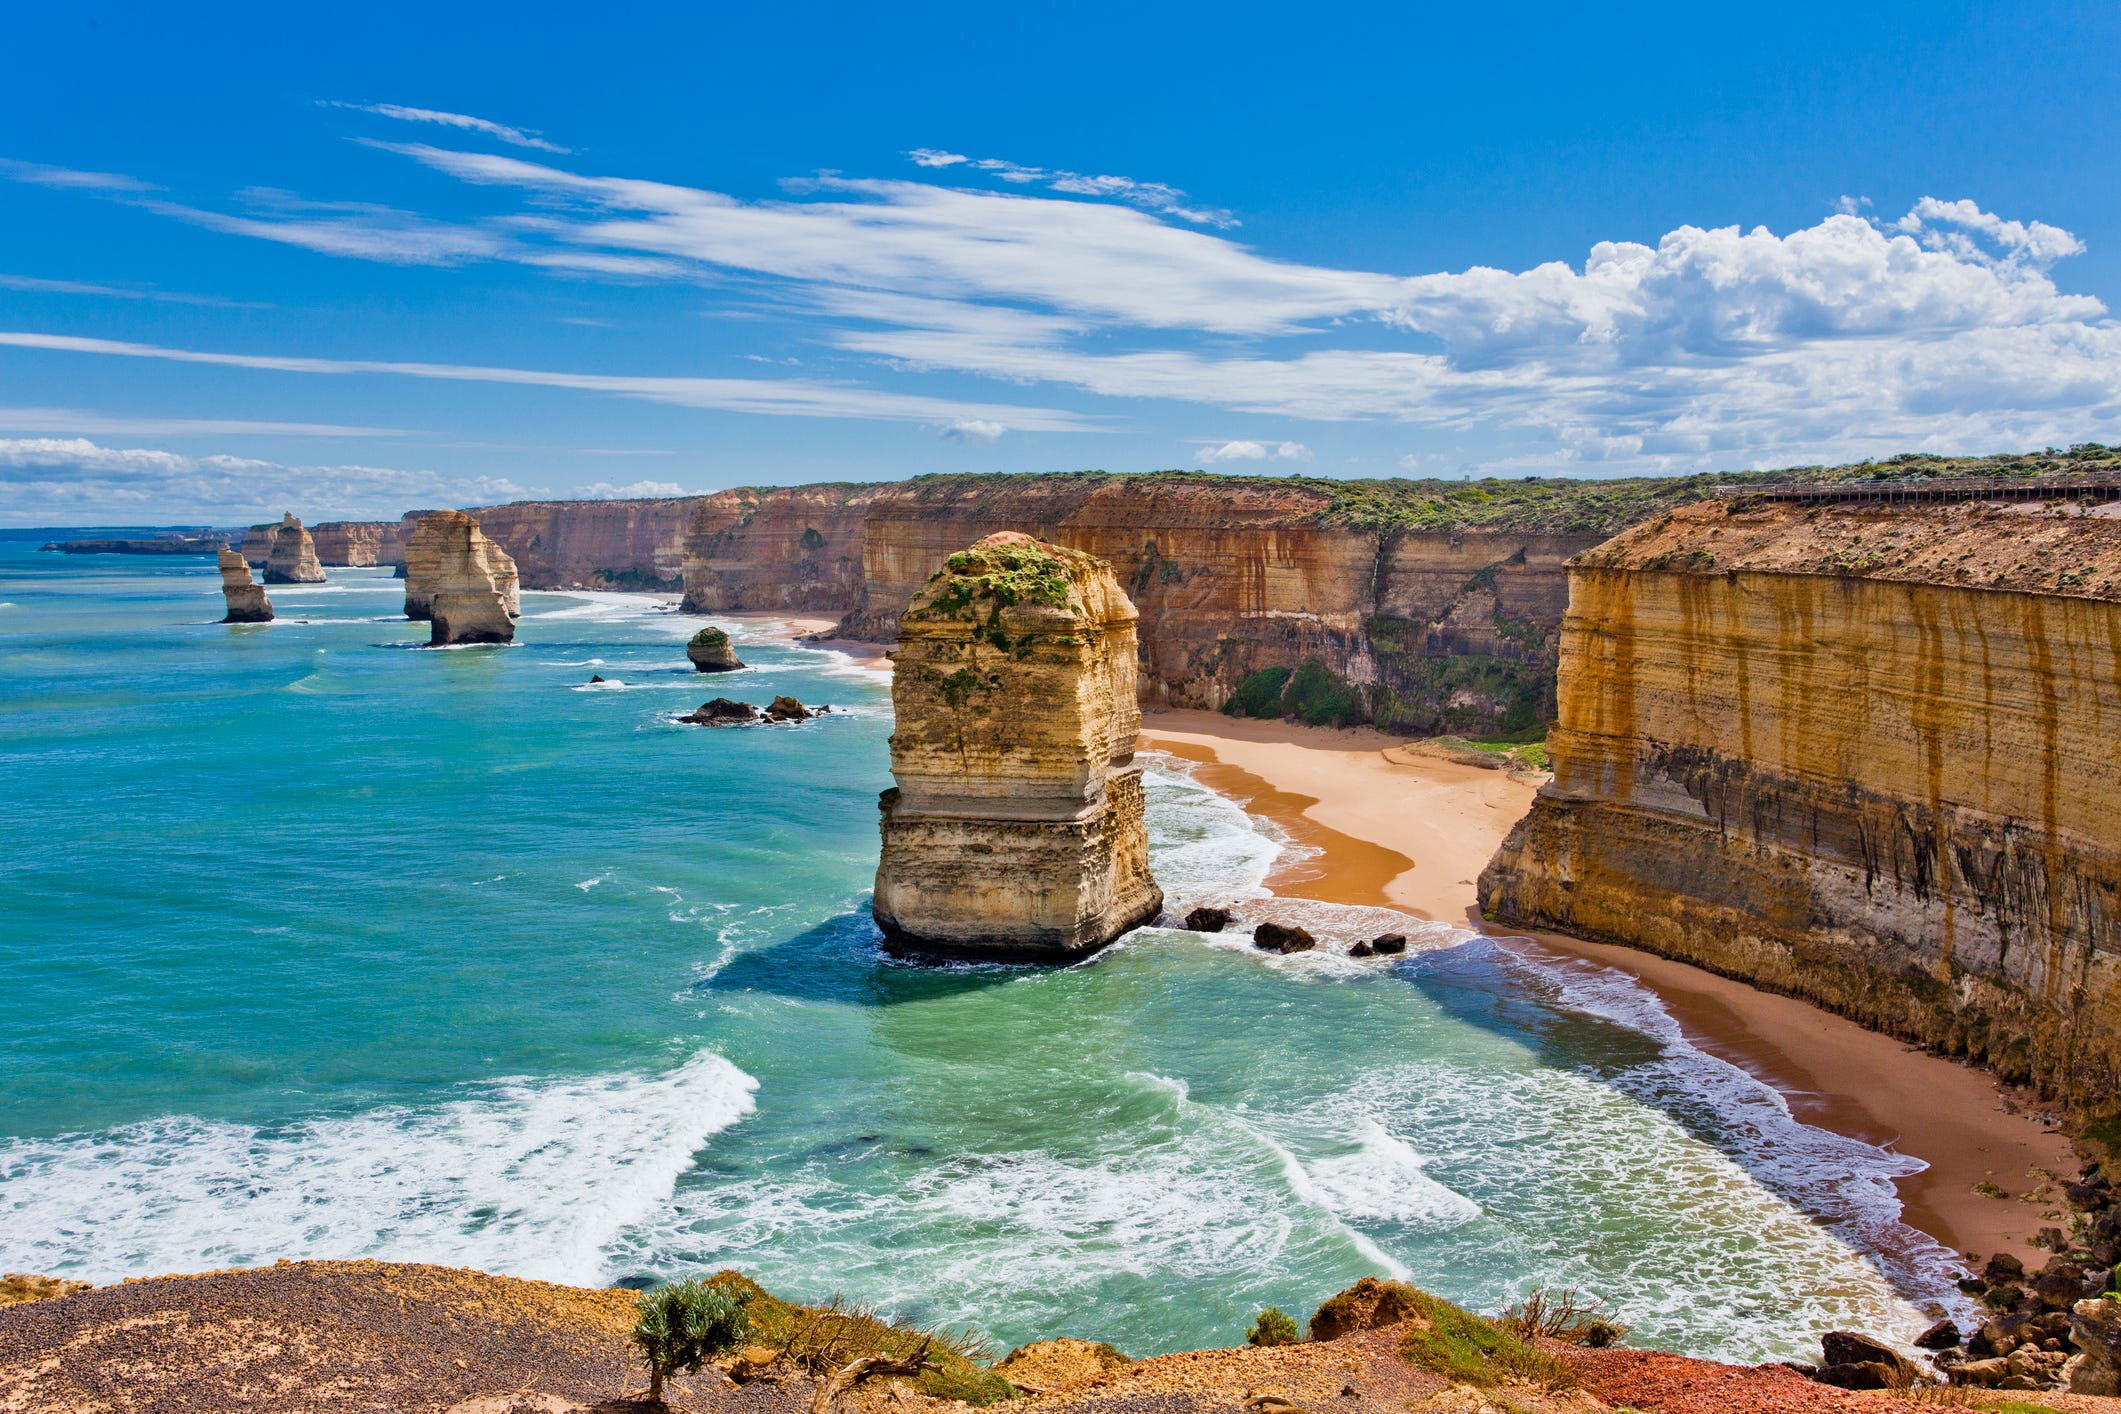 <p><a href="https://www.businessinsider.com/australians-share-what-tourists-should-know-before-visiting-2022-10">Australia</a> has no shortage of natural attractions, from coral reefs to rainforests to the culturally important Uluru Rock.</p><p>My favorite, however, is the Great Ocean Road along the Victorian coastline. It is an easy day trip from my hometown of Melbourne, and although I have driven this road many times, I have never tired of it.</p><p>The drive is one of the most stunning in the world, as the road clings to the coastline, offering panoramic views. Its highlight is the Twelve Apostles, a natural rock formation caused by thousands of years of erosion.</p>